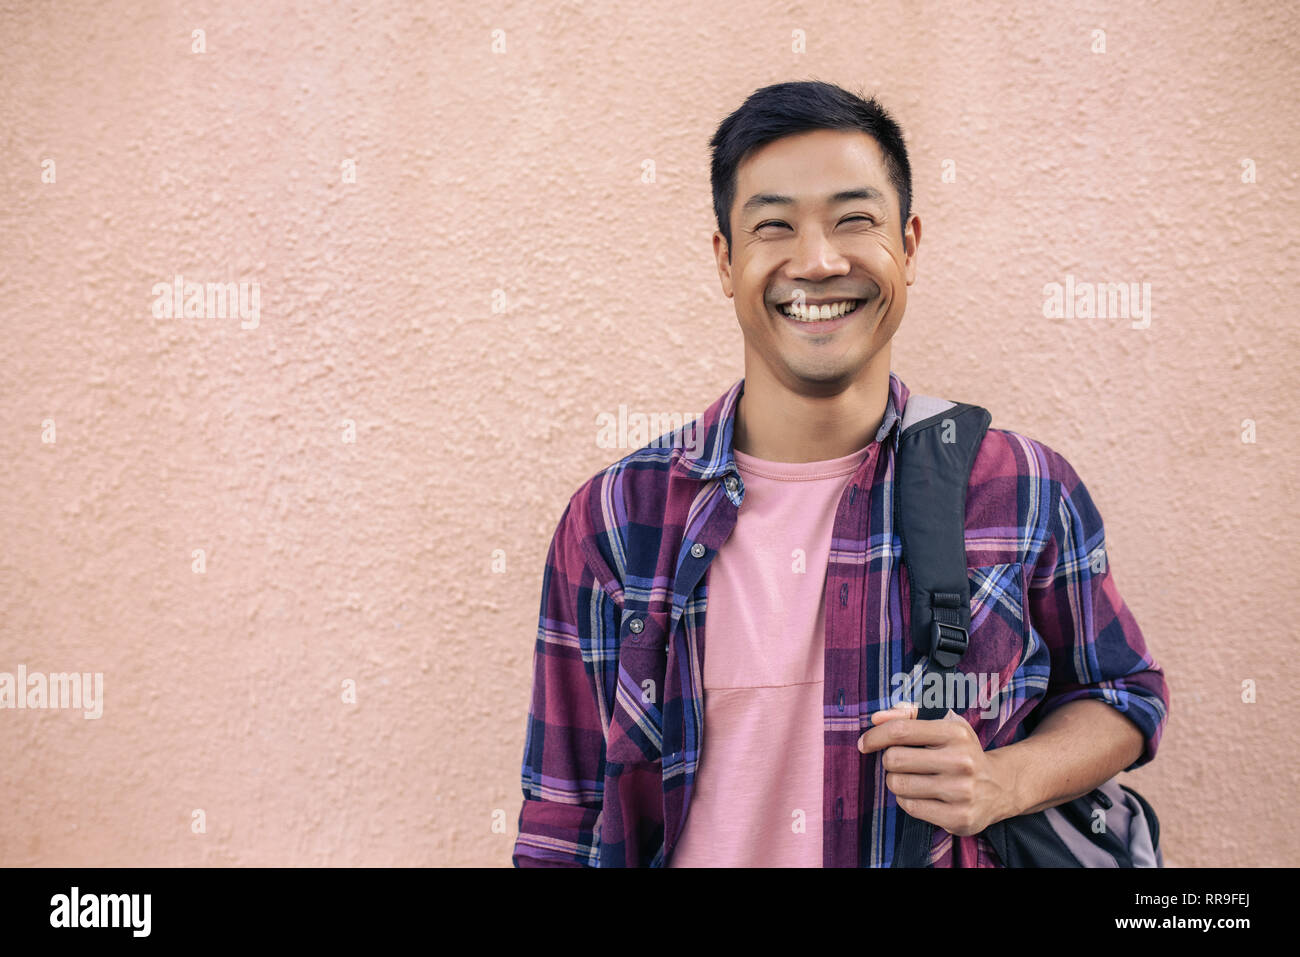 Smiling young man standing outside carrying a backpack Stock Photo